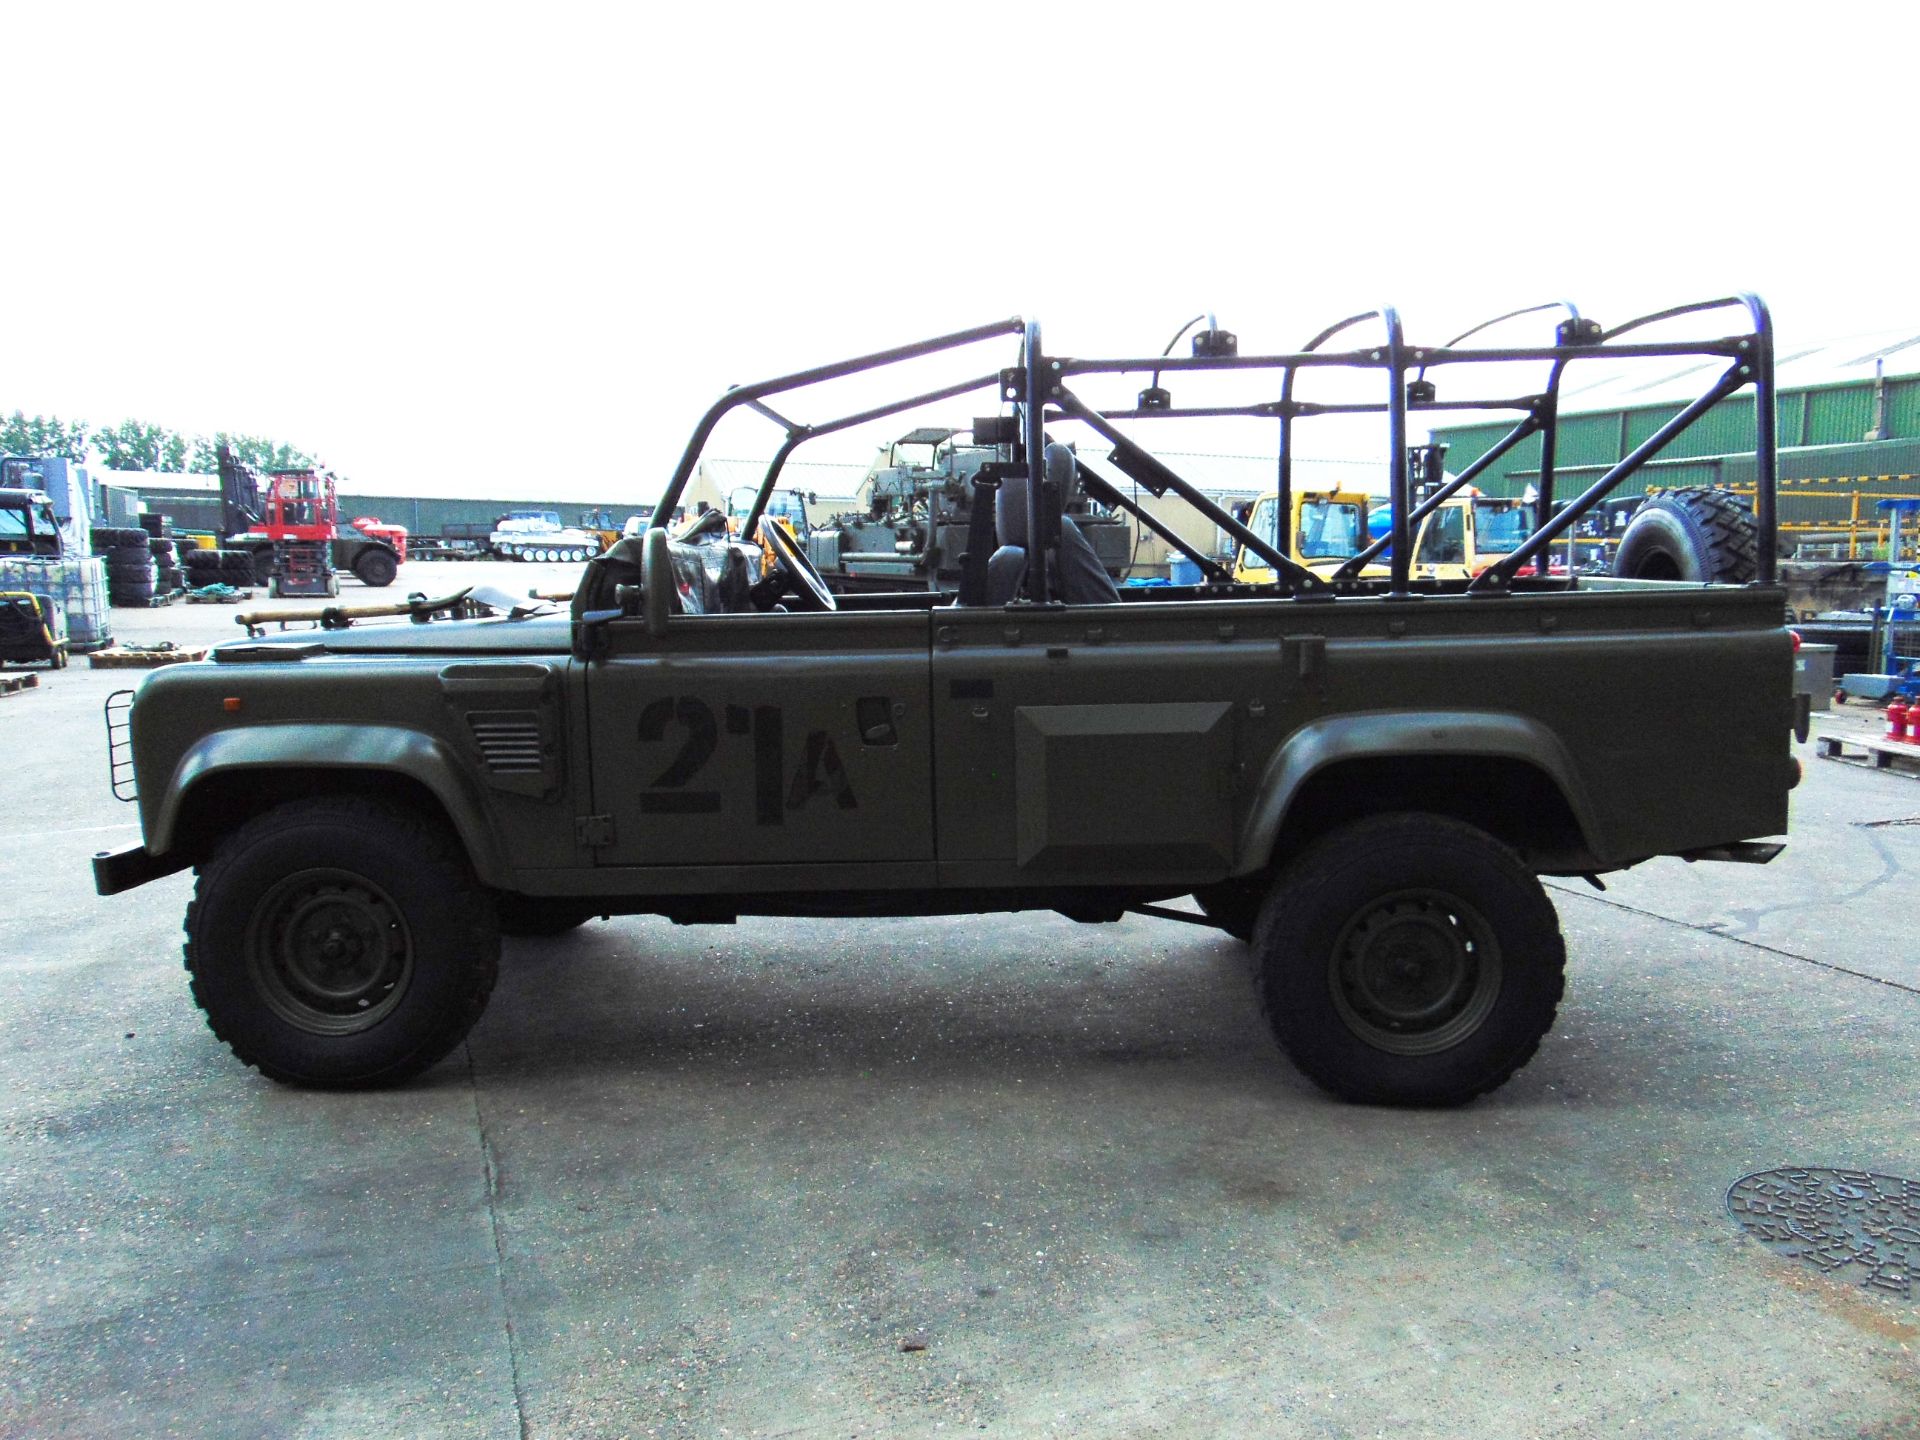 Land Rover Defender Wolf 110 Scout vehicle 300 Tdi - Image 6 of 37